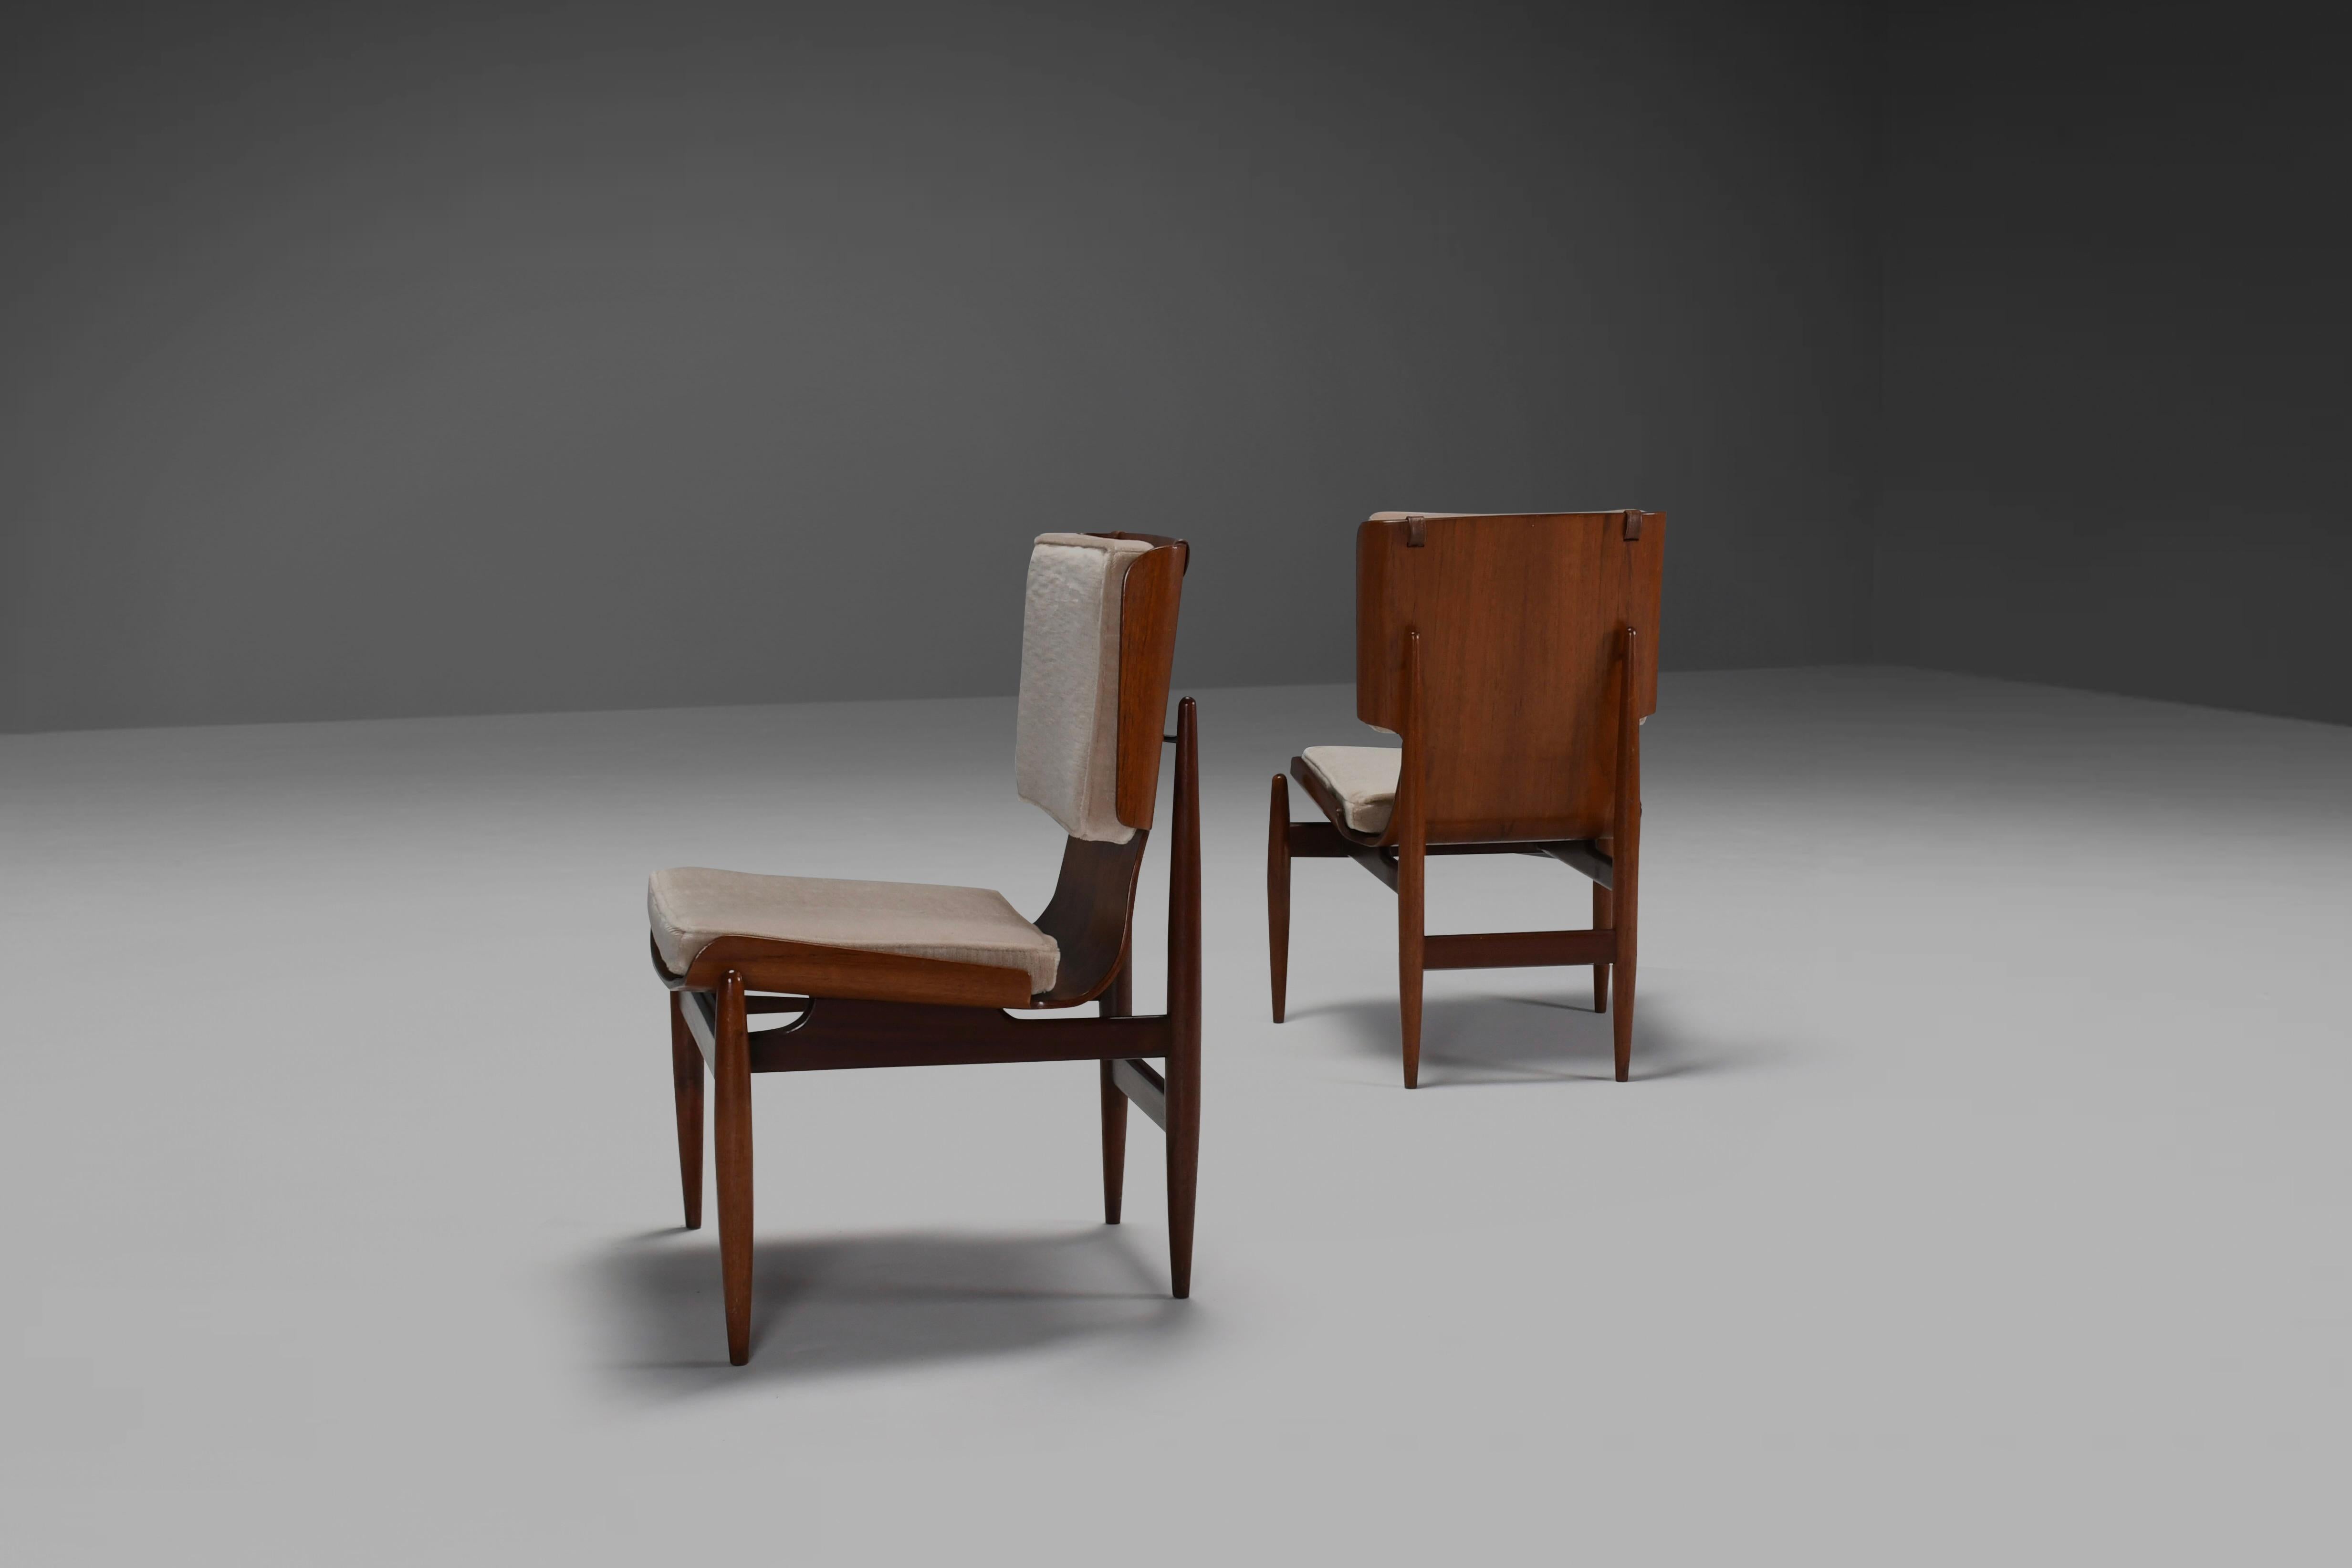 Italian Pair of Mohair and Plywood Chairs by Barovero Turino, Italy 1960s For Sale